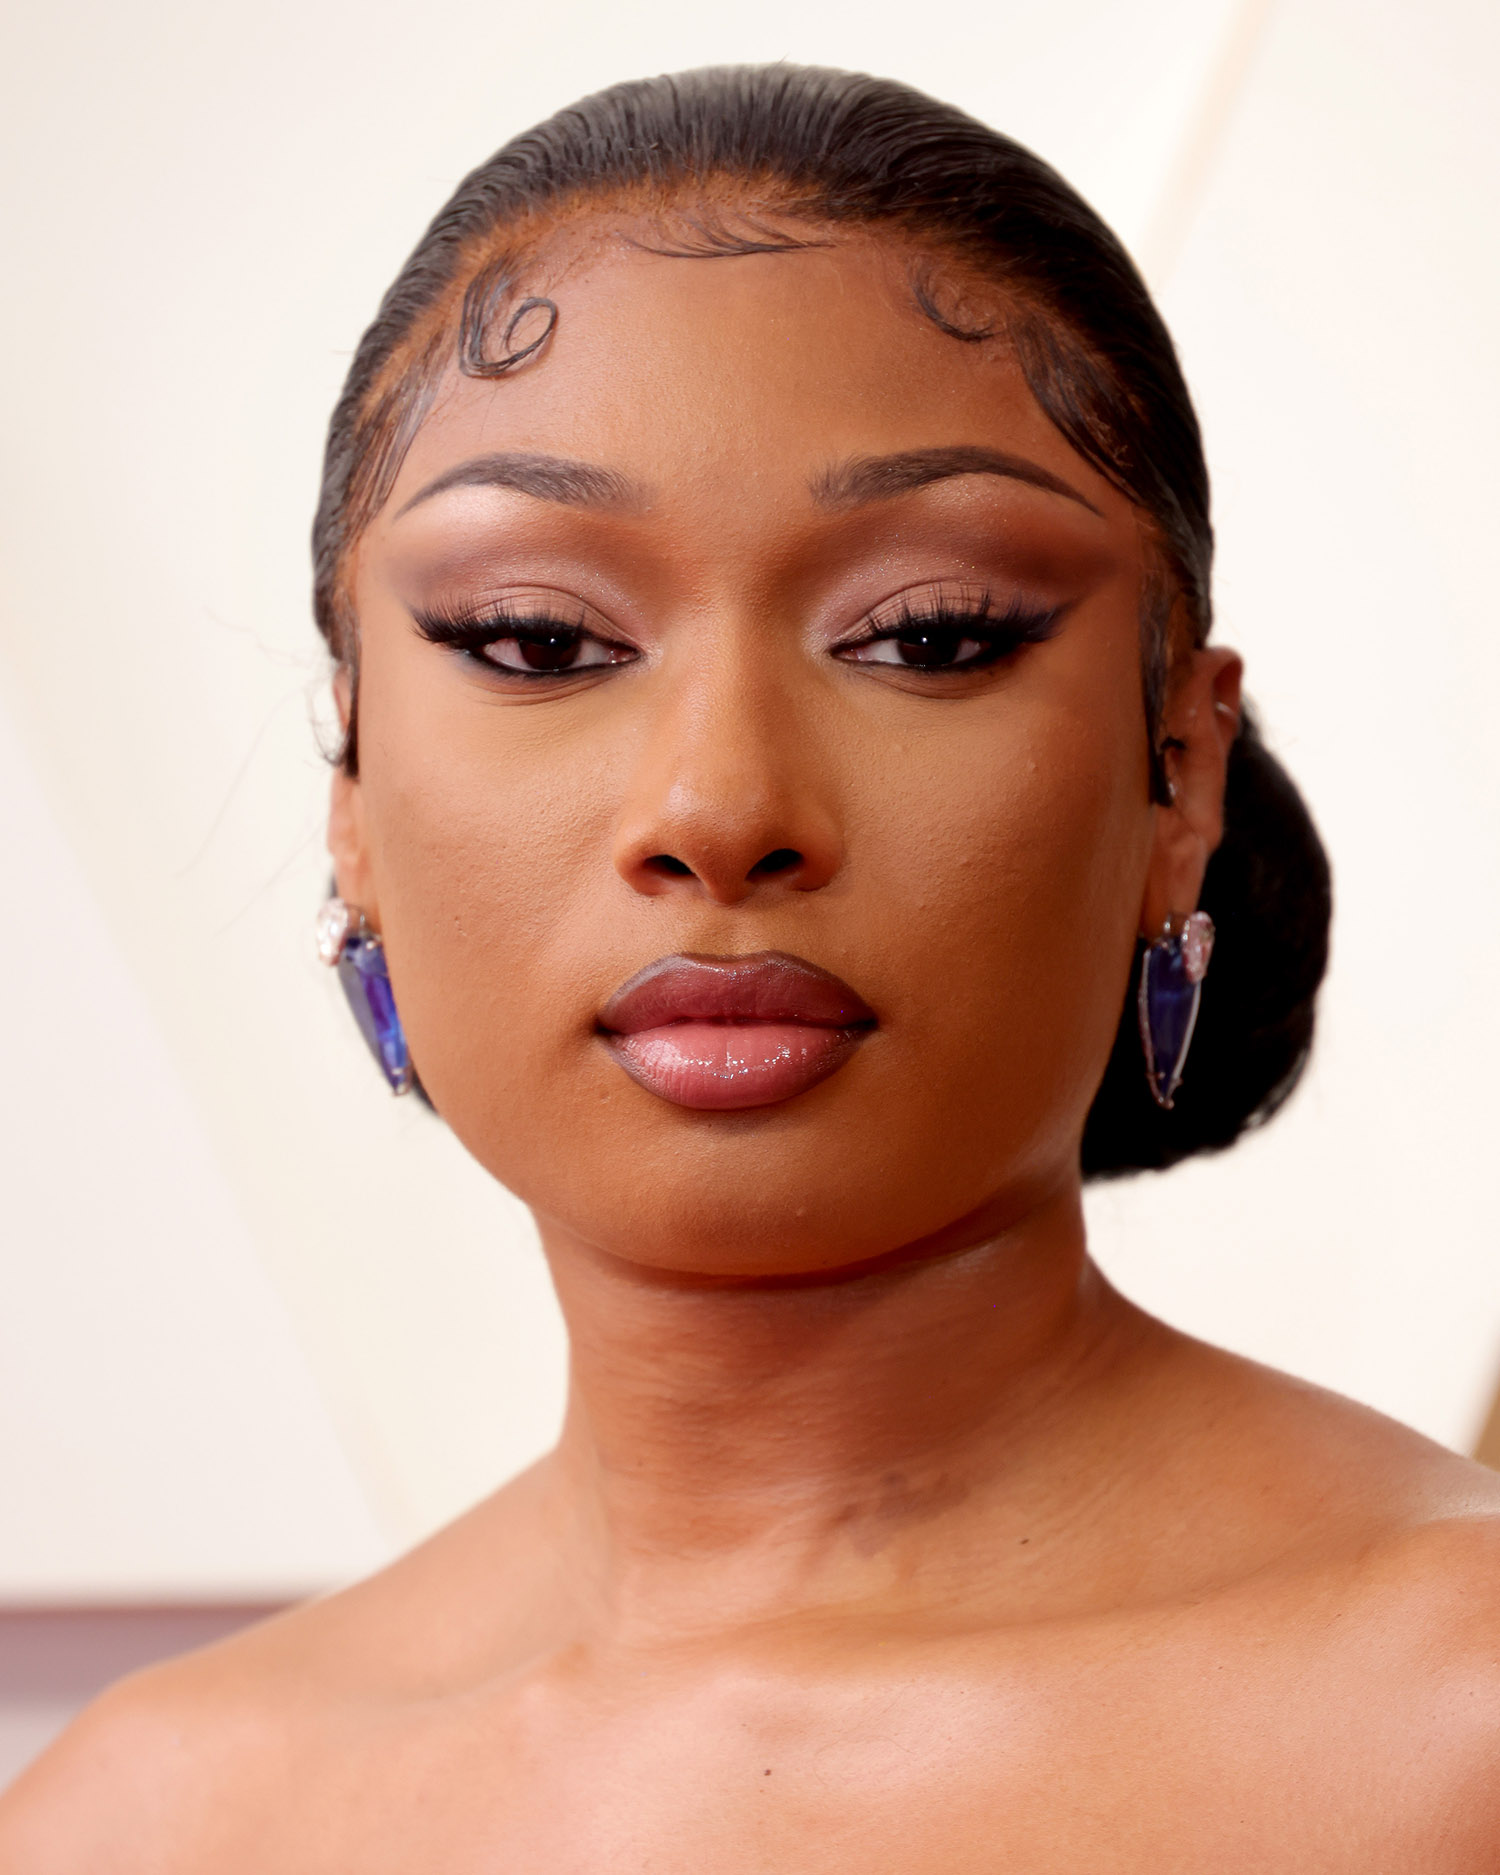 Megan Thee Stallion attends the 94th Annual Academy Awards at Hollywood and Highland on March 27, 2022 in Hollywood, California